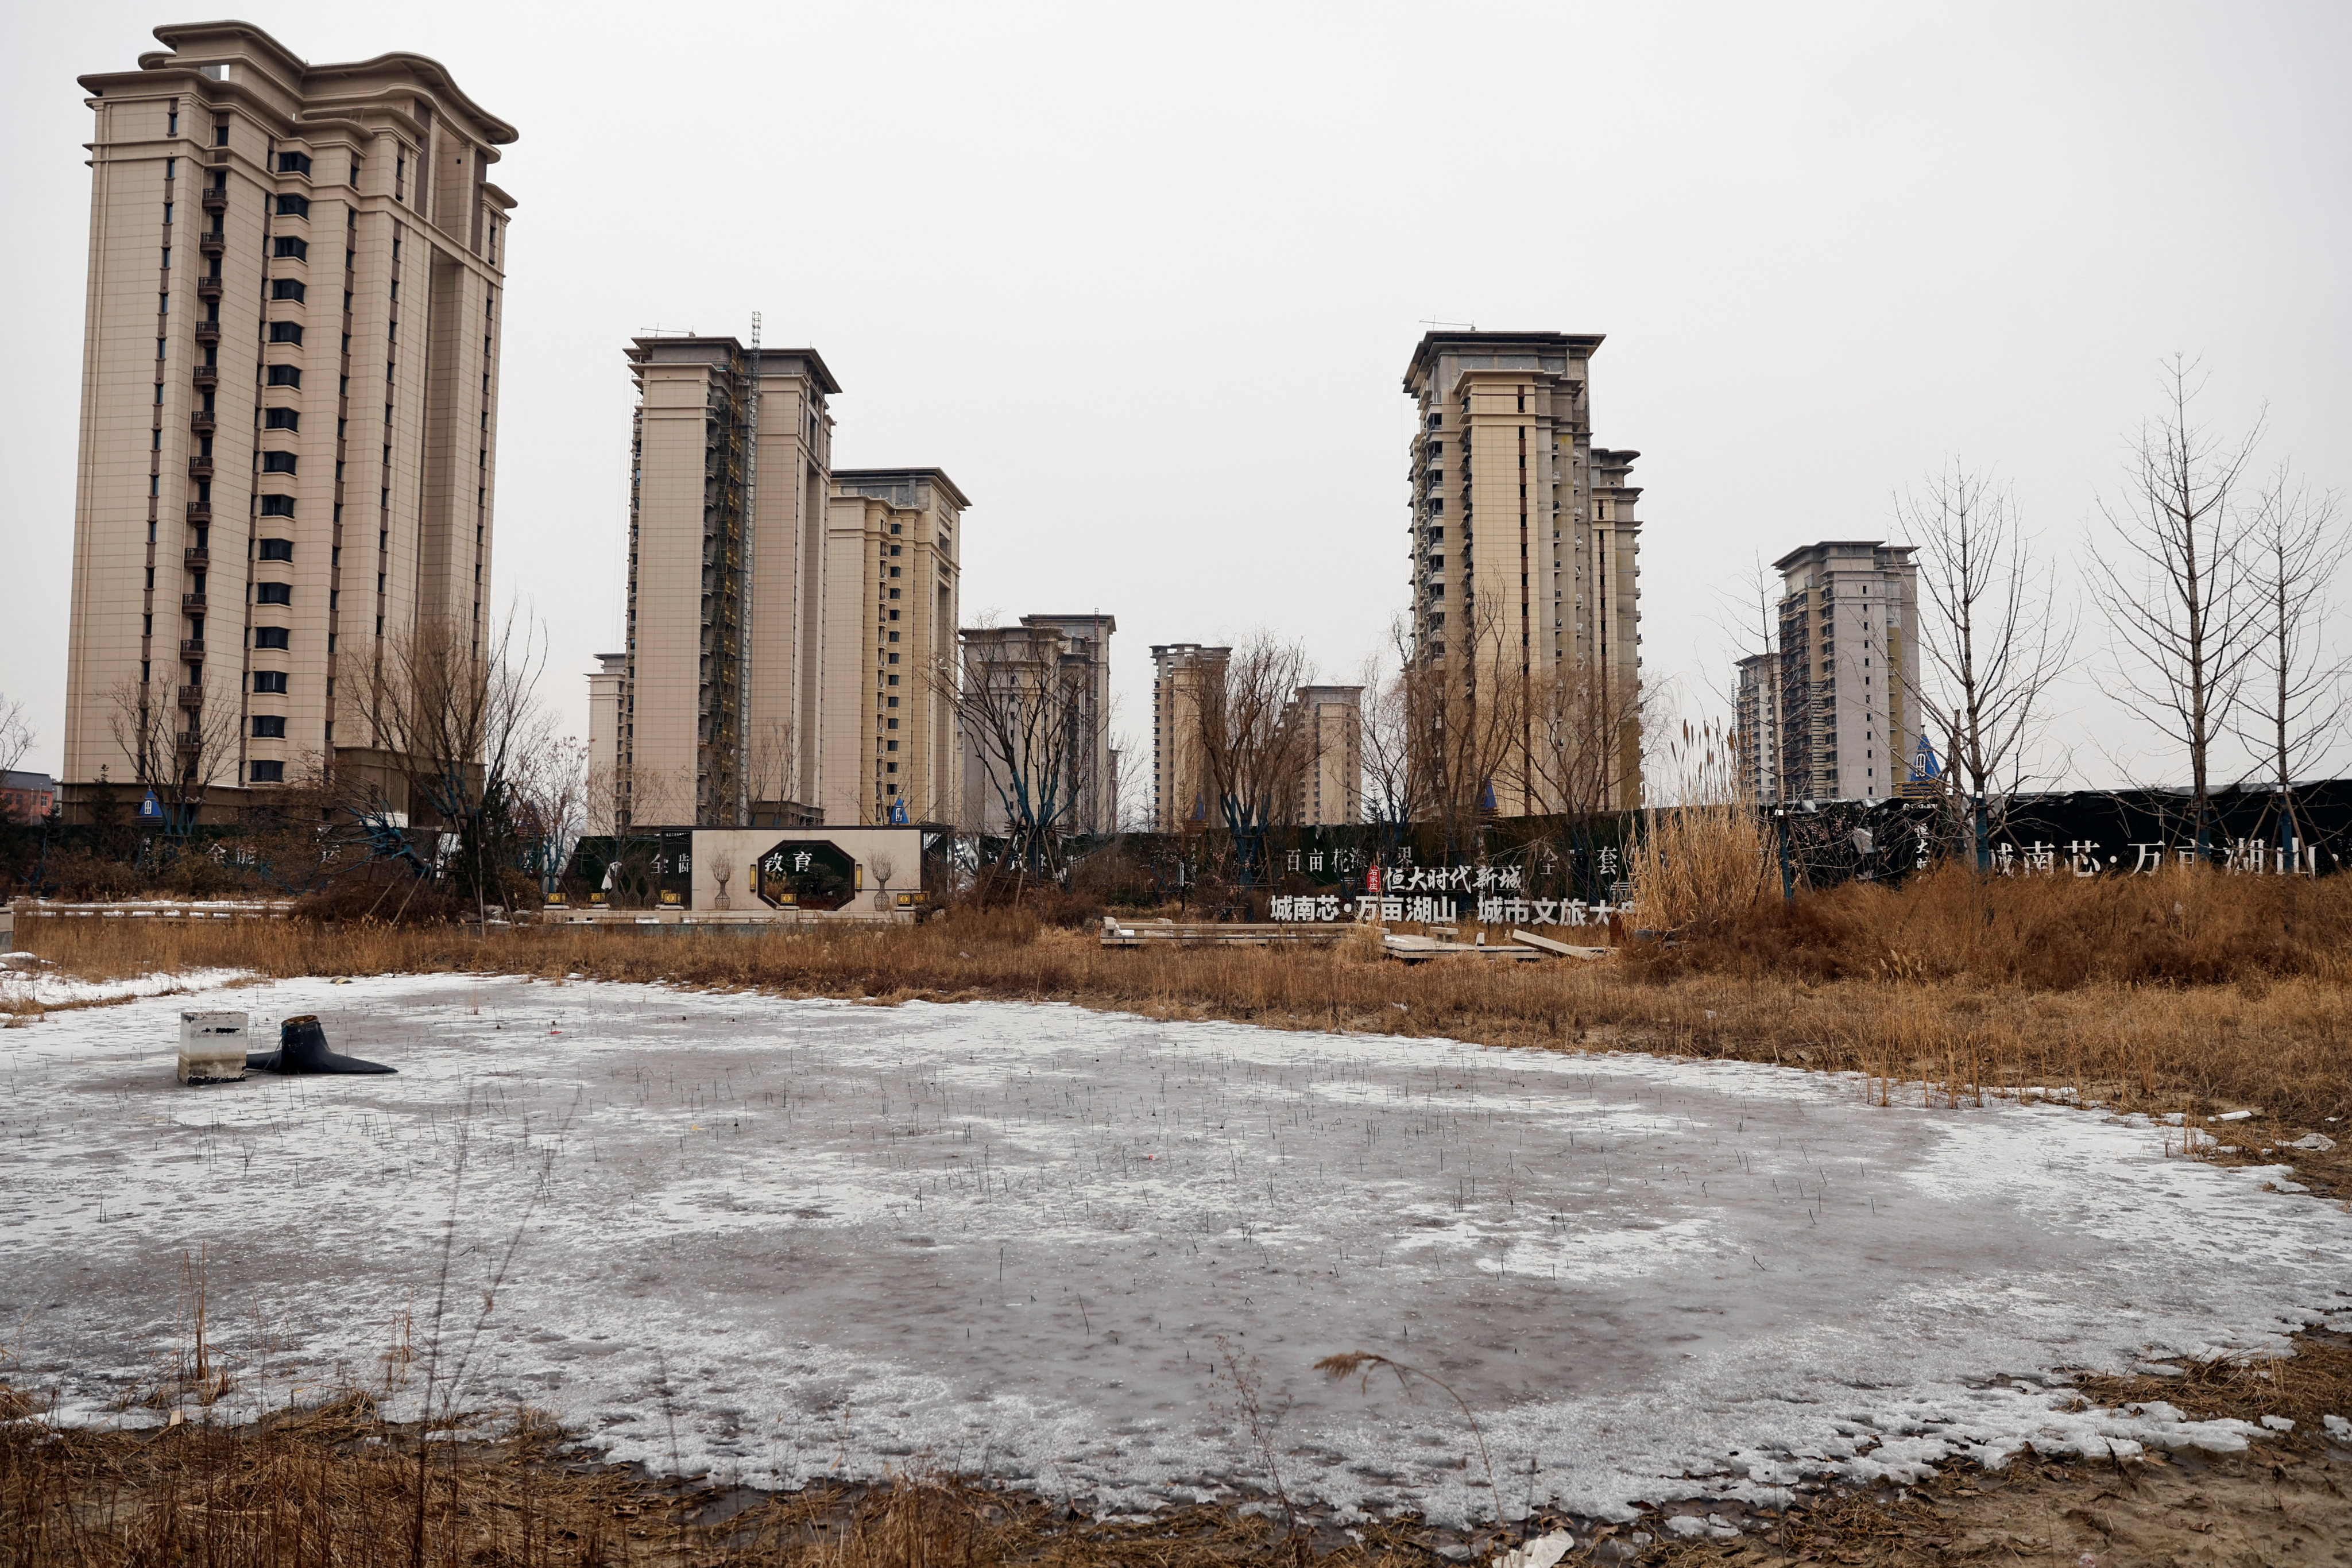 A view of an unfinished residential compound developed by China Evergrande Group on the outskirts of Shijiazhuang, Hebei province. Photo: Reuters